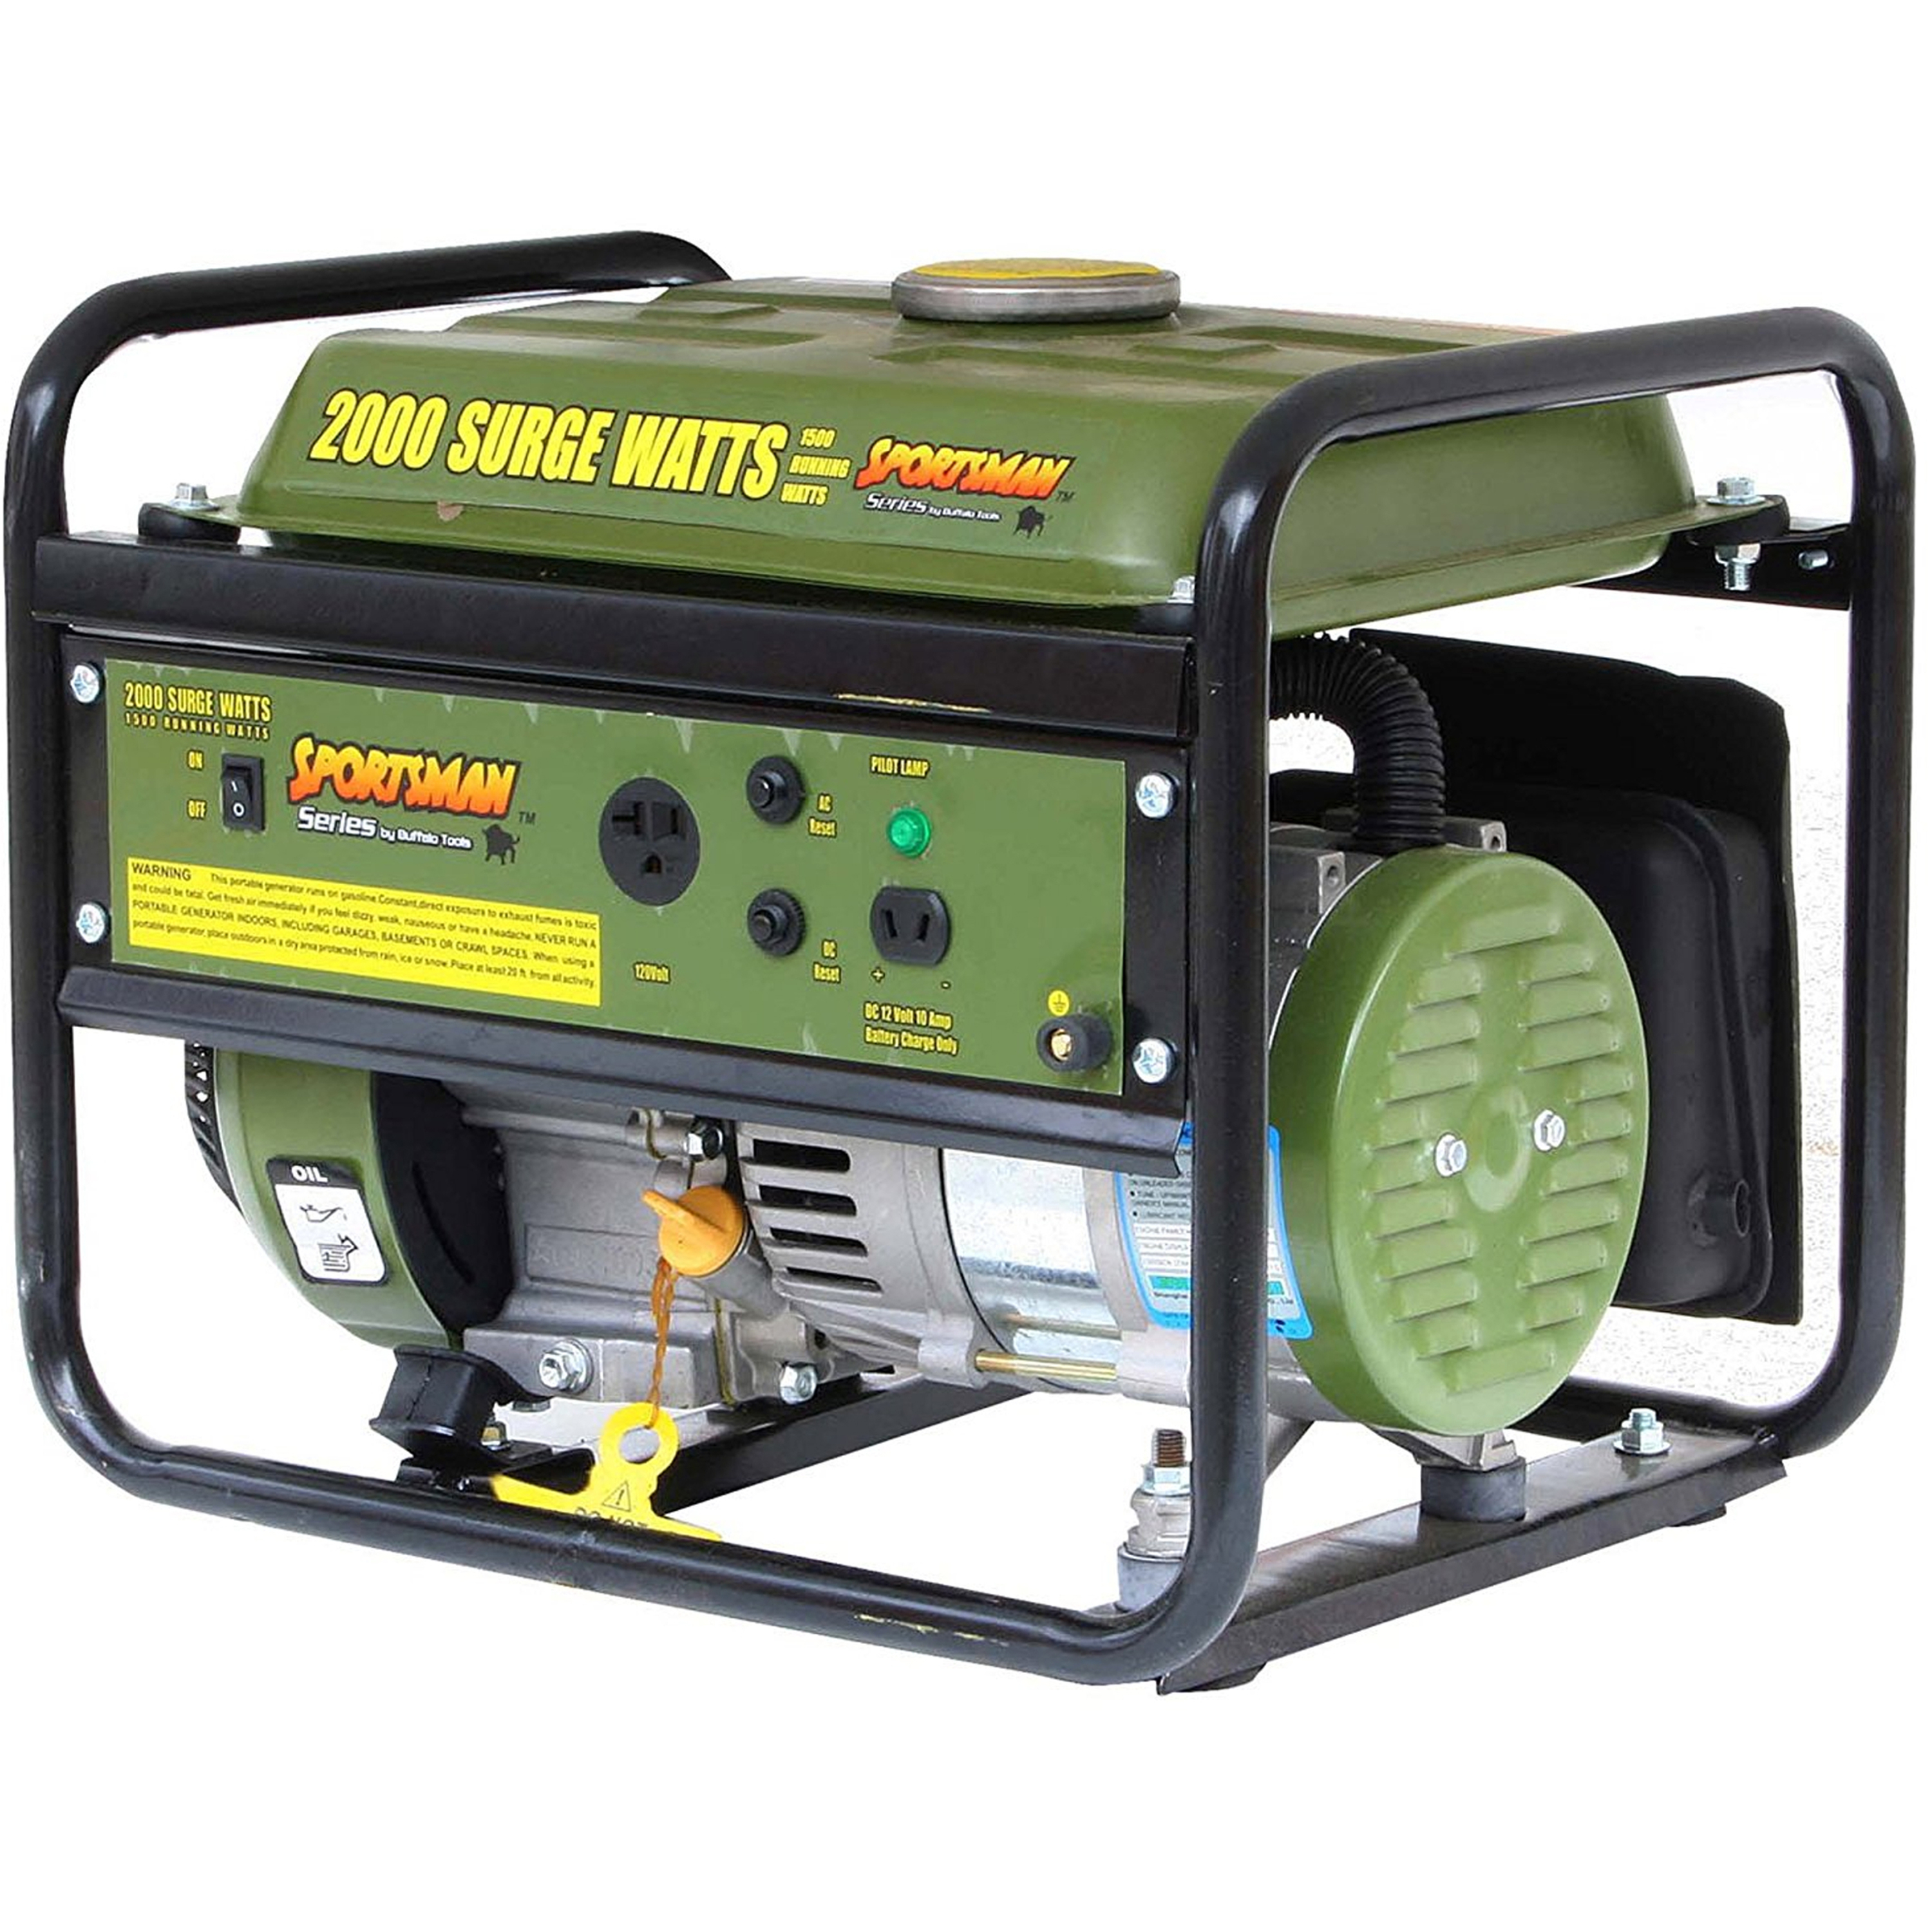 Generator, 1500 W, 2.8 HP, 4 Stroke OHV Engine, Recoil Start, 12V and 120V Outlet, 1.8 Gallon Tank - image 1 of 6